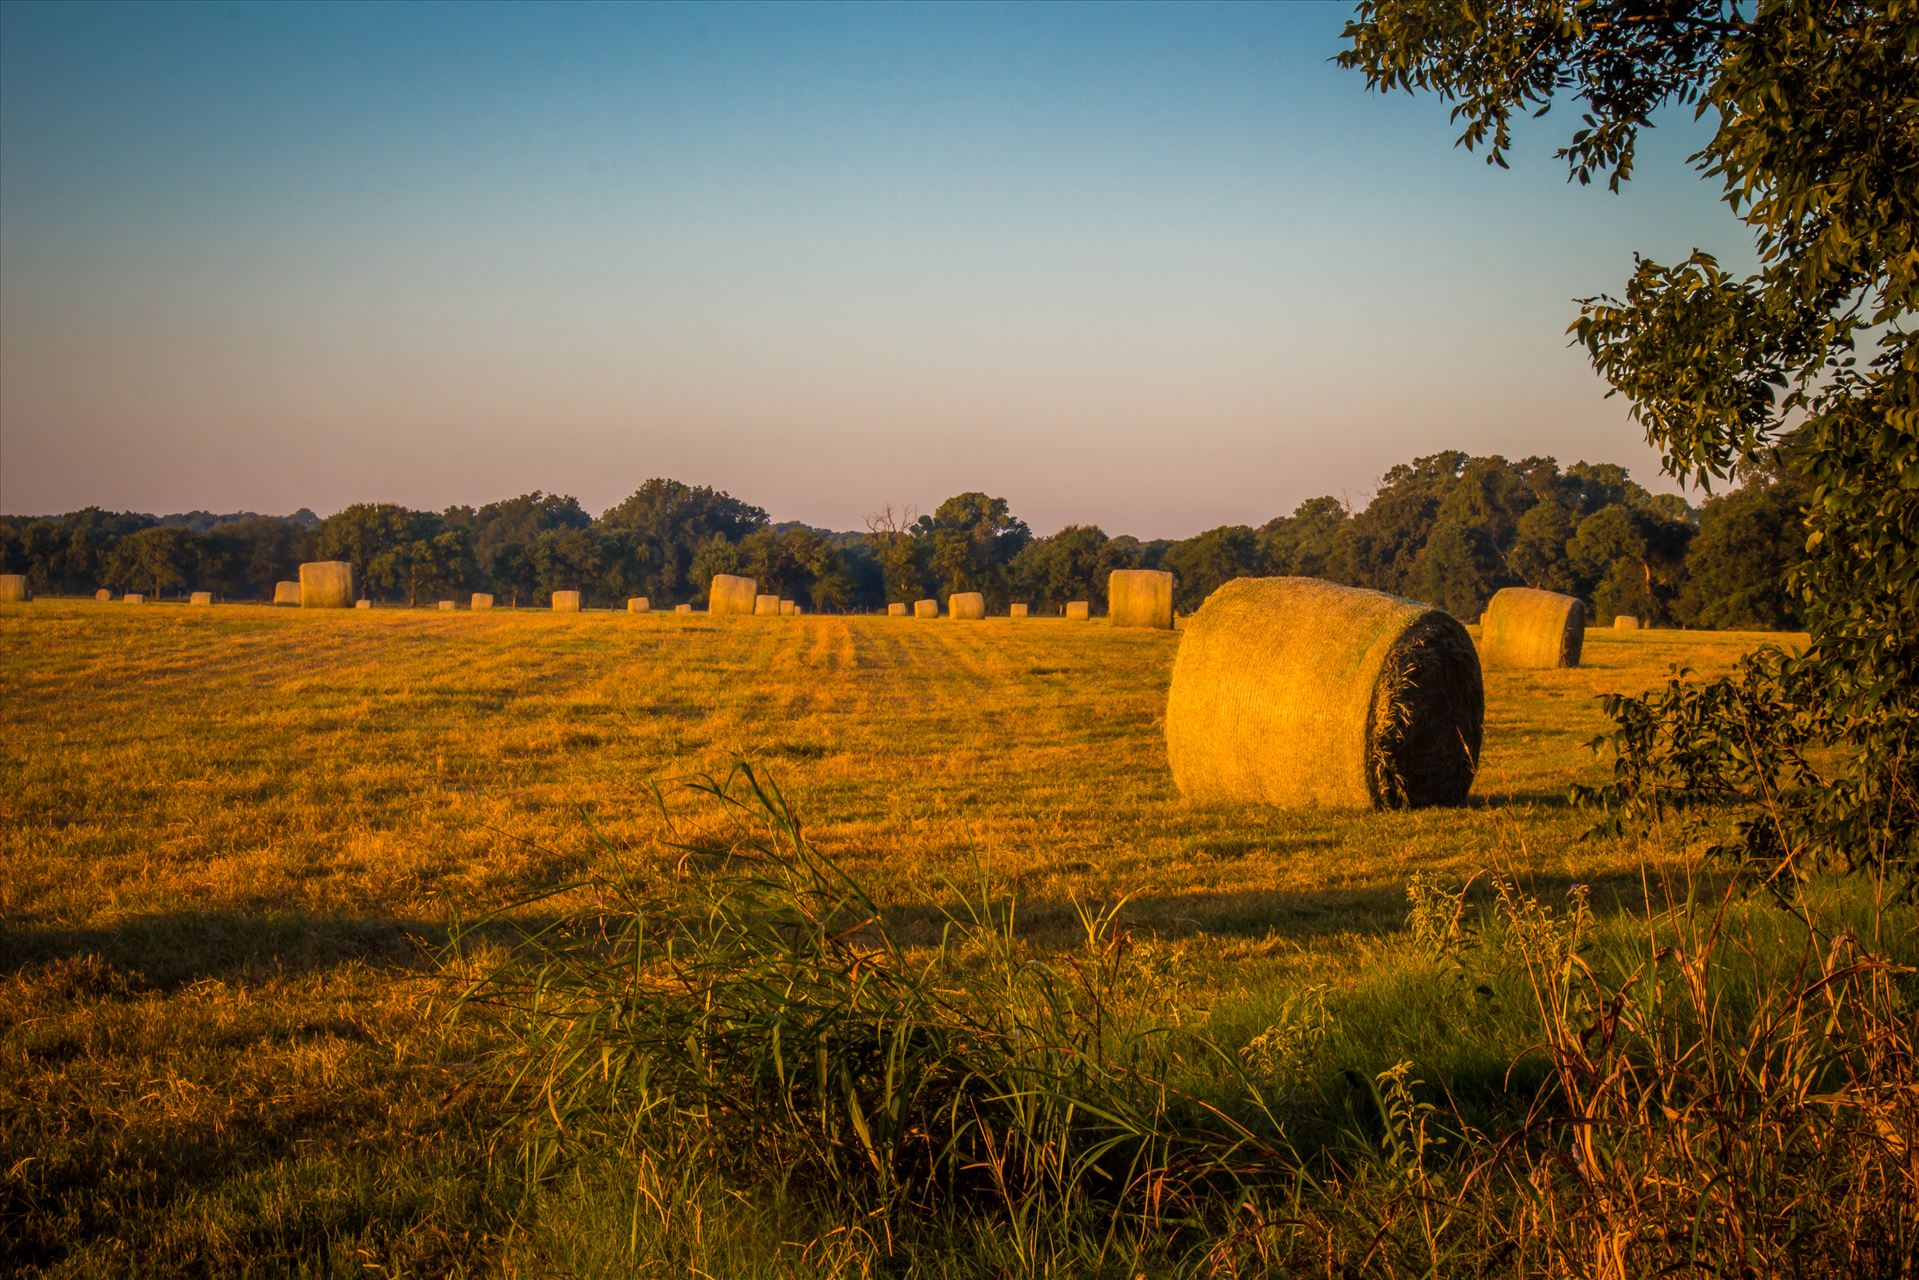 20170819_Hay Field_019.jpg  by Charles Smith Photography